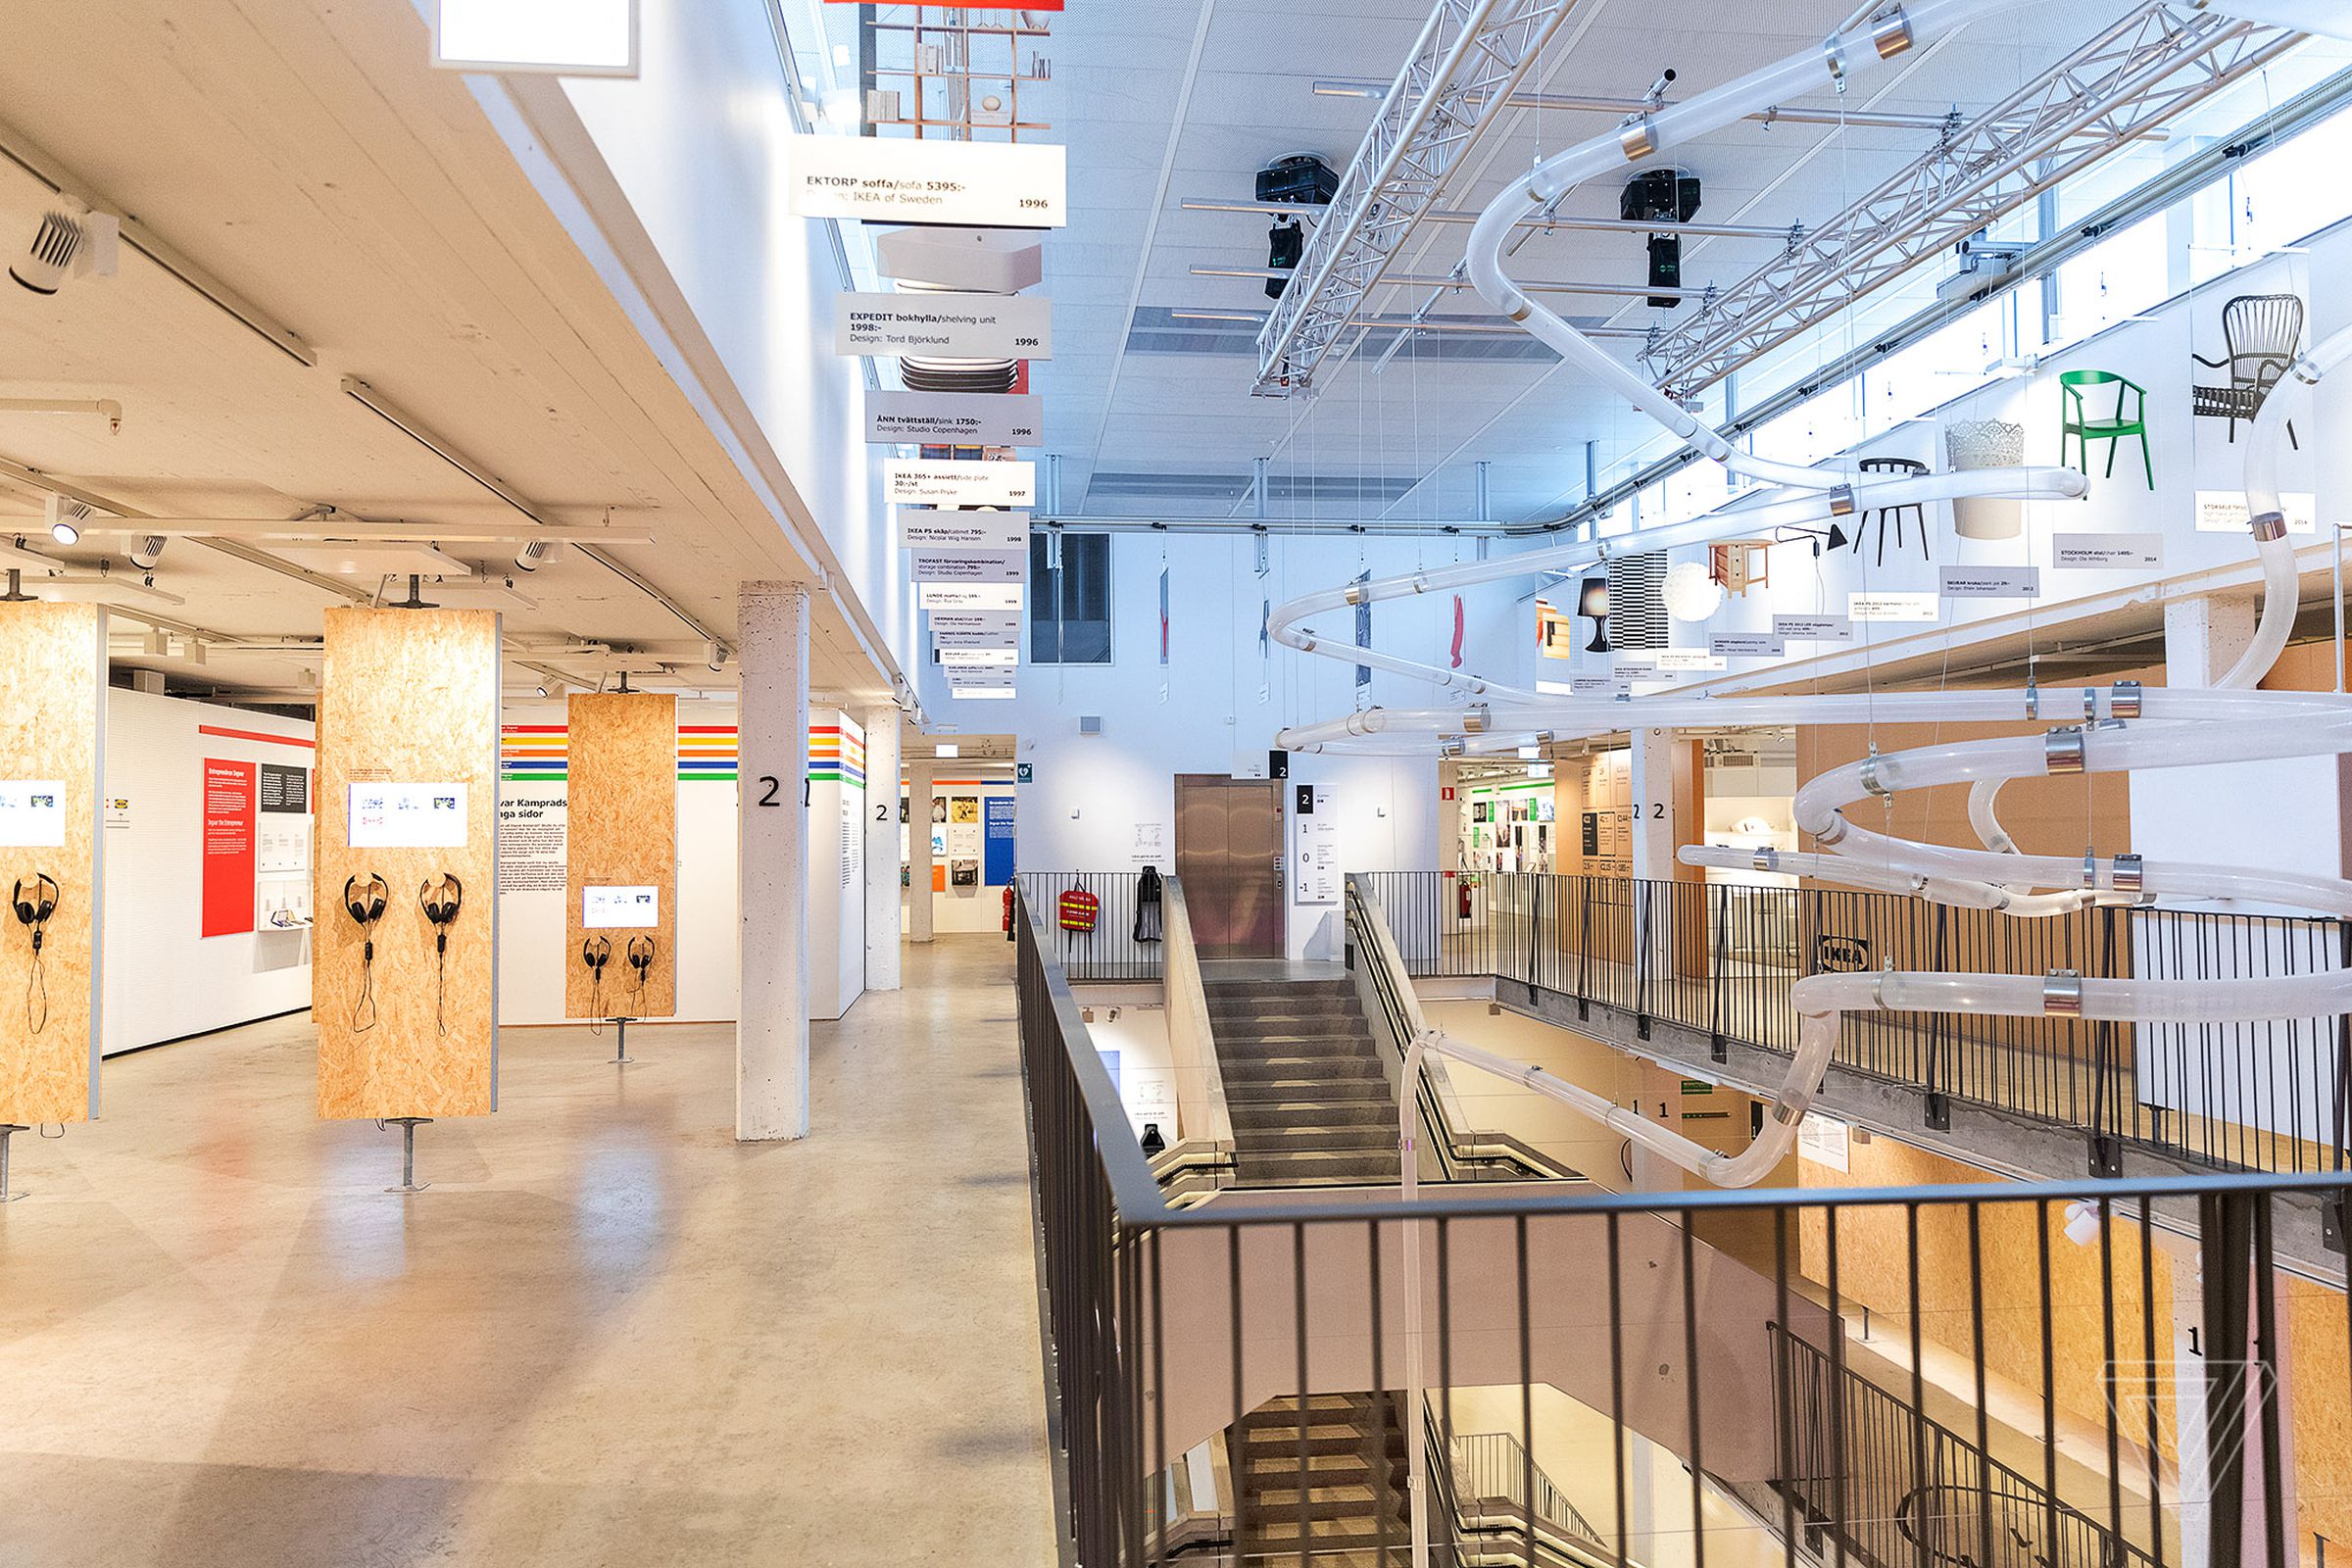 Ikea’s first store, now the Ikea Museum, pays homage to the company founded in 1943 by Ingvar Kamprad.